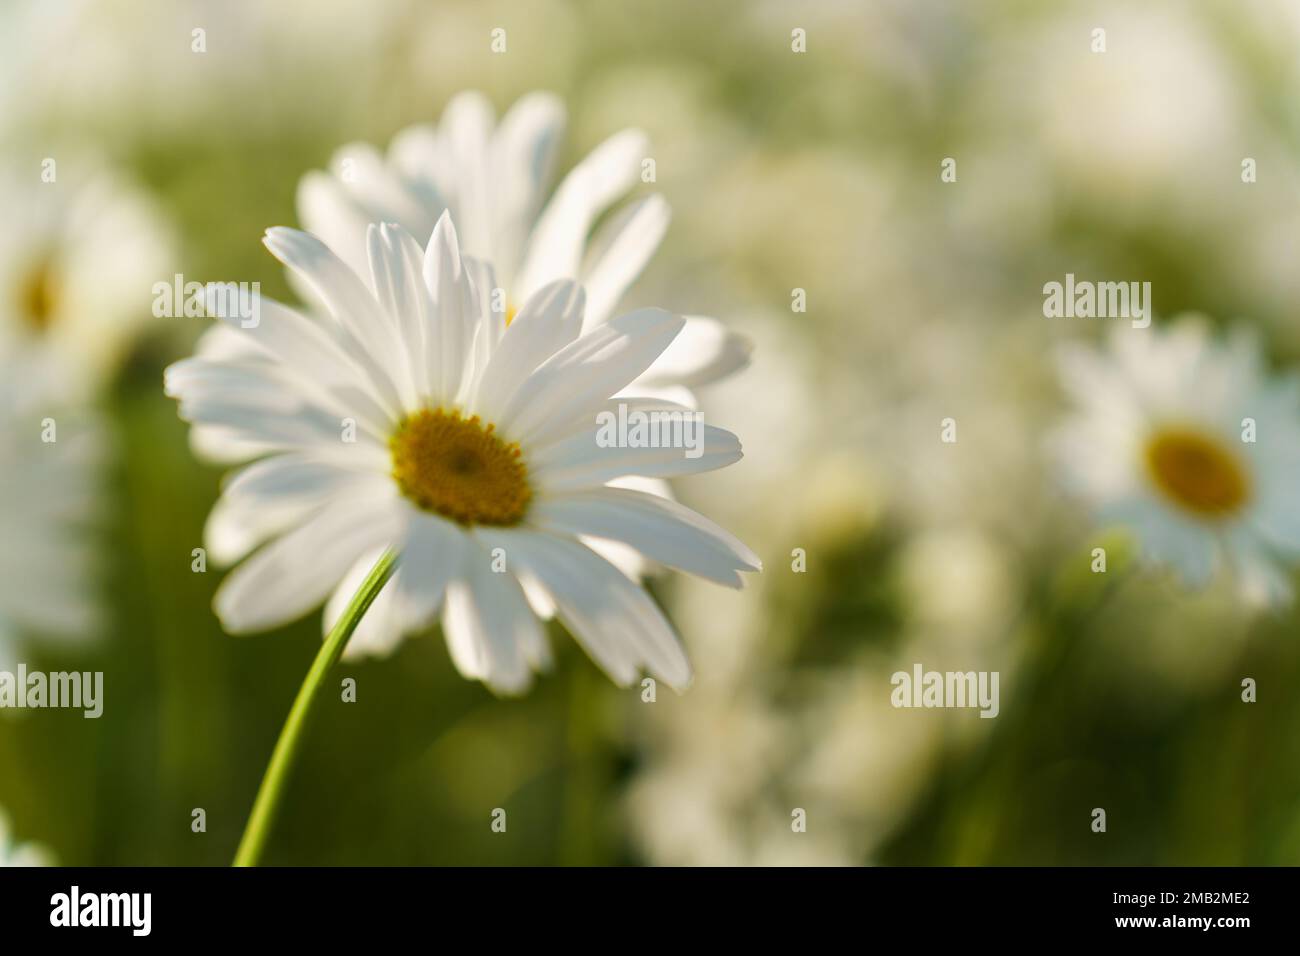 Focus in the foreground on a chamomile flower close-up. Stock Photo